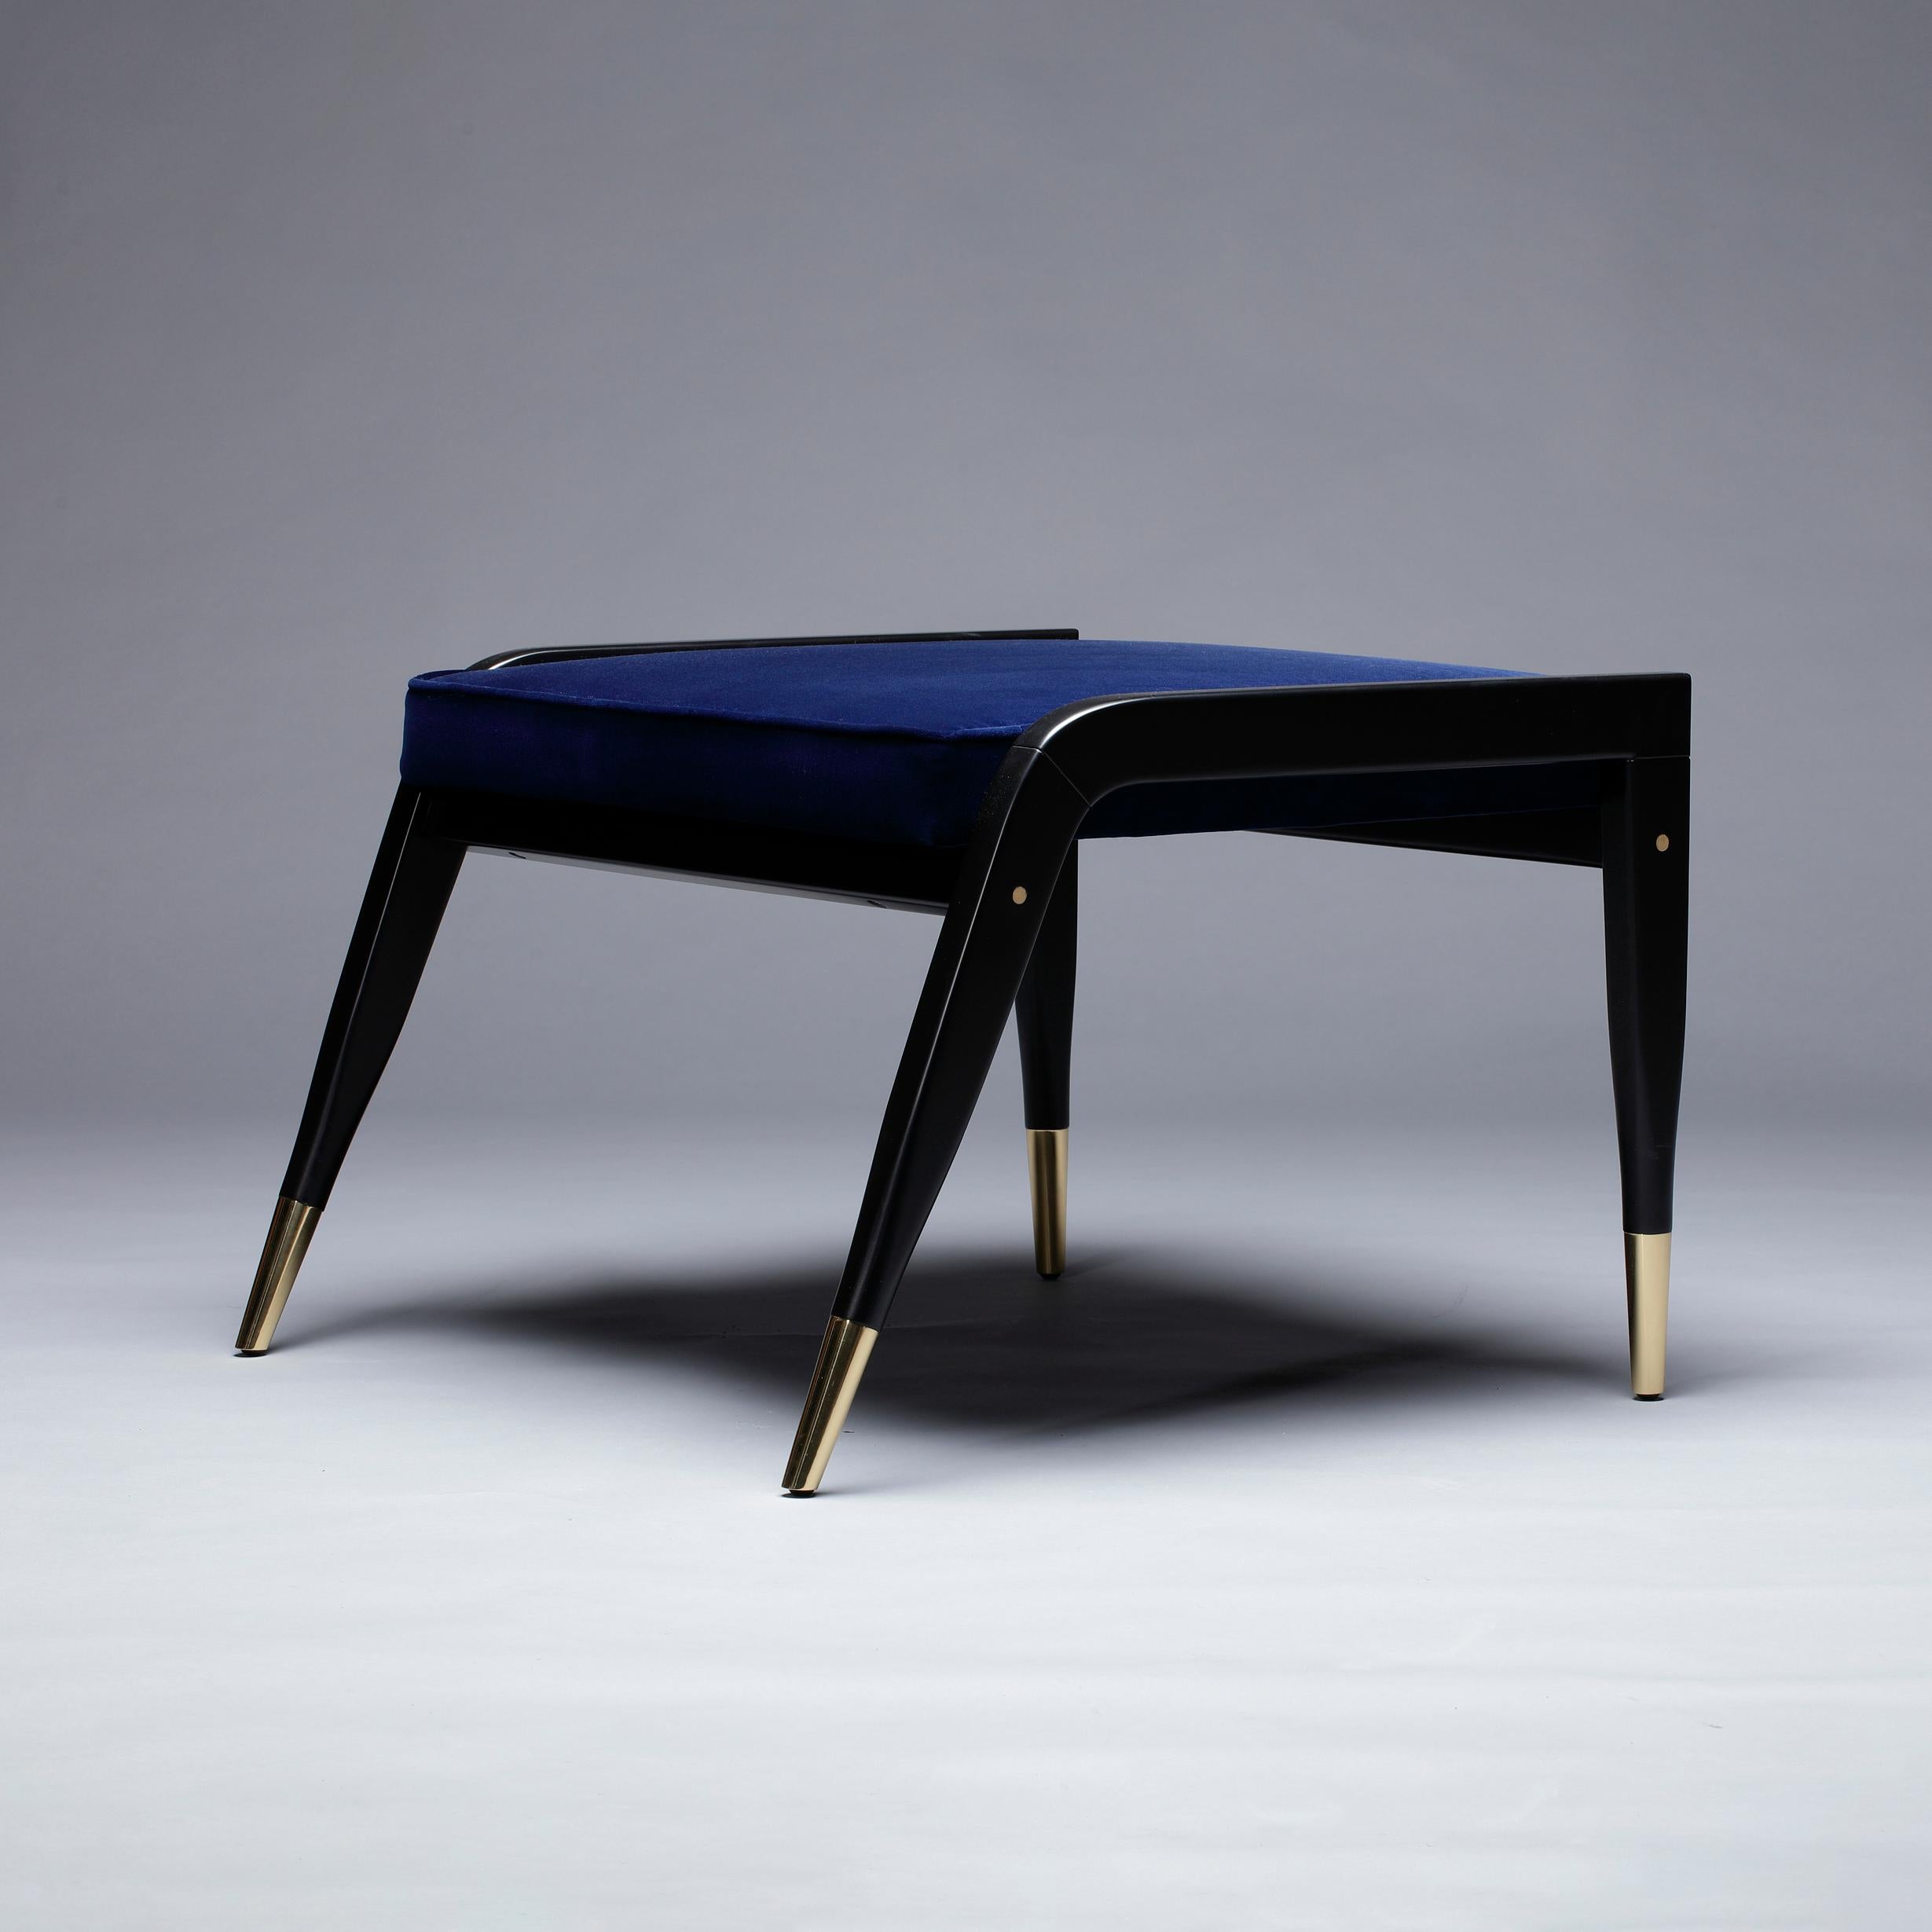 Wormley Footstool by DUISTT 
Dimensions: W 67 x D 66 x H 44 cm
Materials: Duistt Fabric, Darkened Sikomoro and Brass details

The WORMLEY foot stool, crafted with great attention to detail, pays a tribute to the American design from the 50s and the